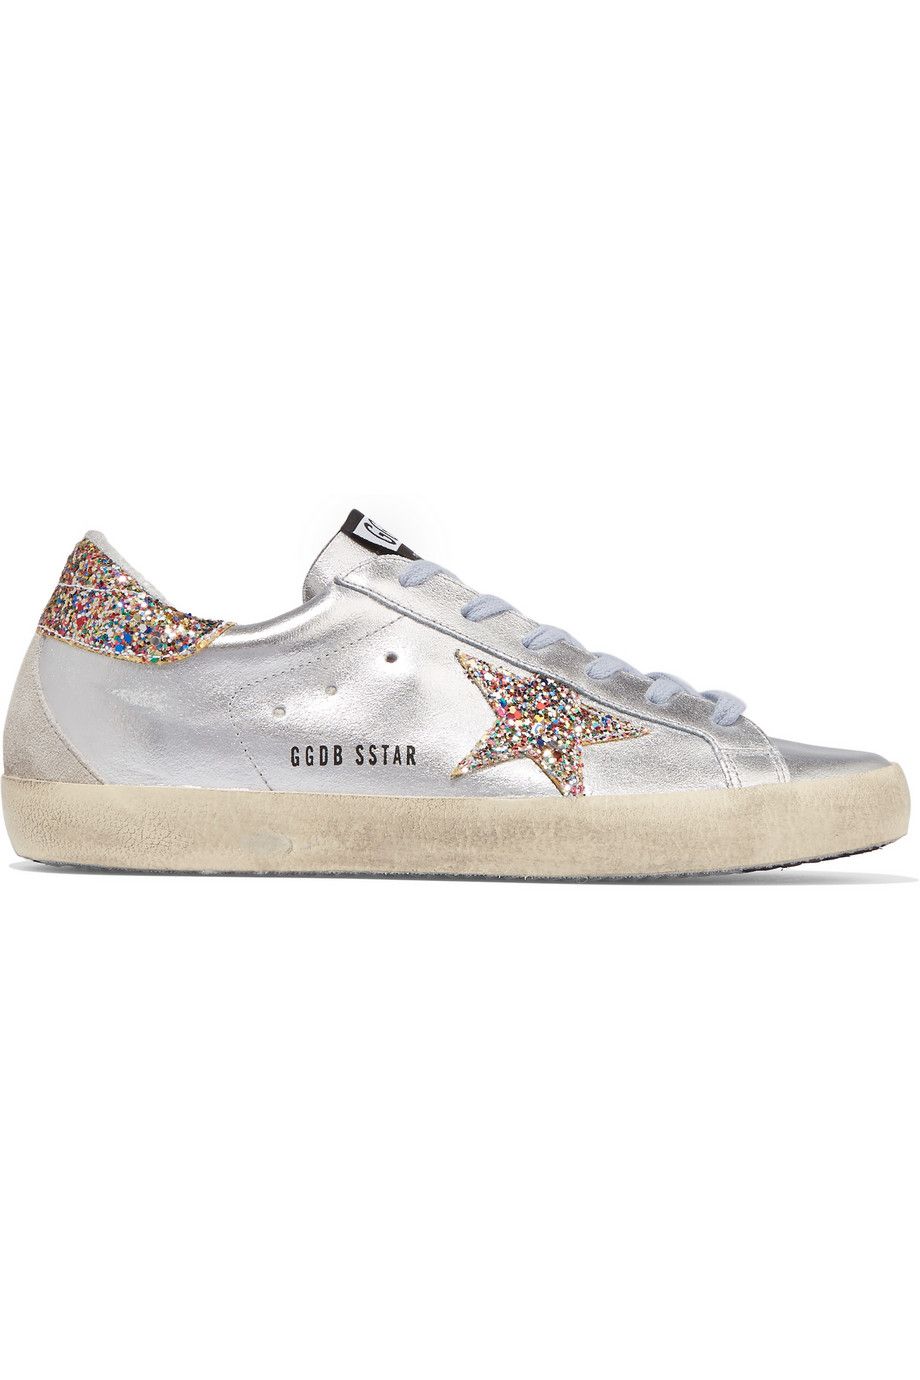 20 pairs of shiny silver trainers to brighten up your weekend